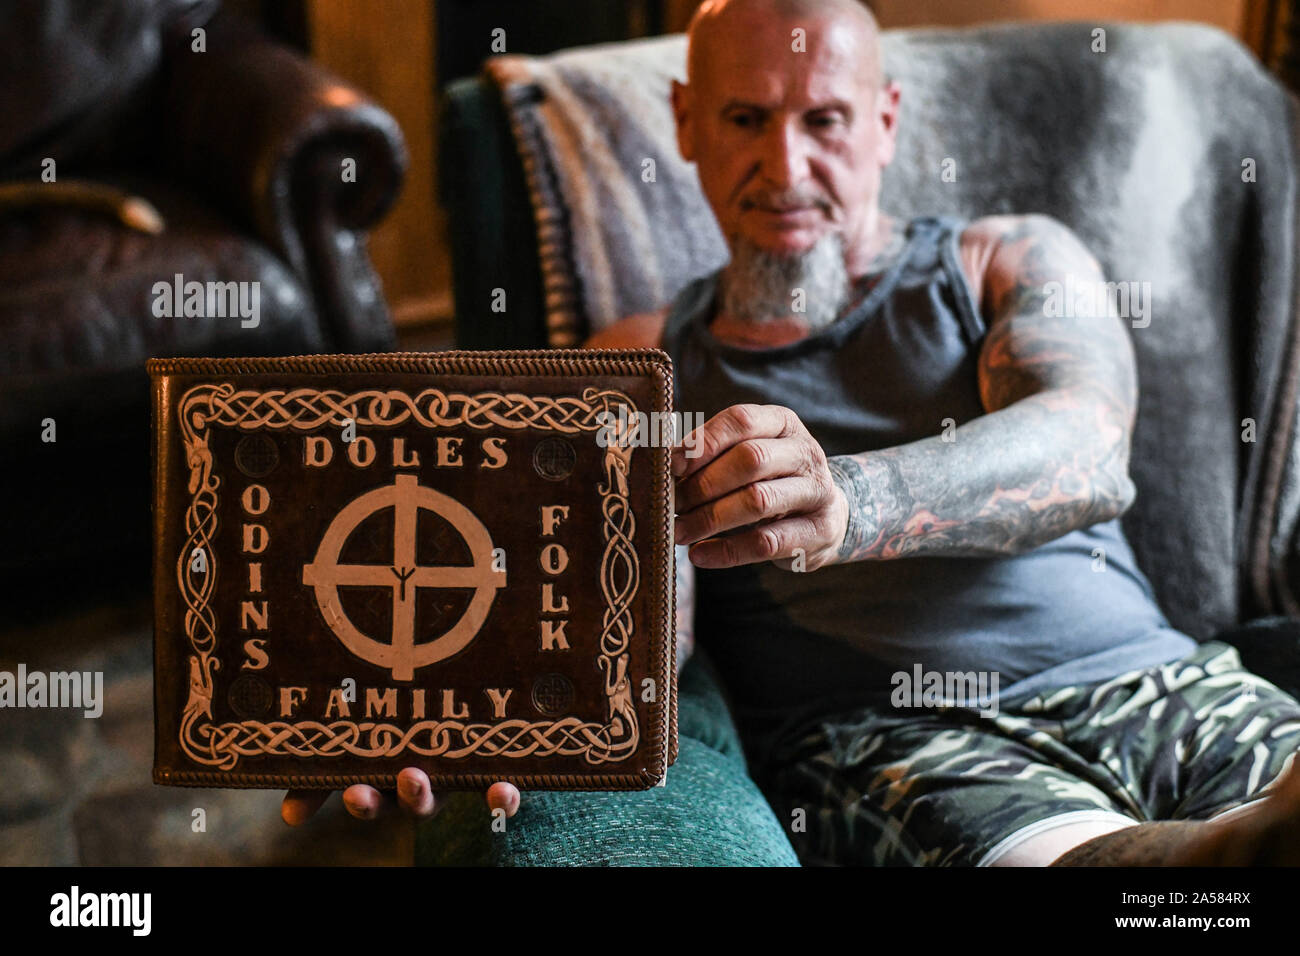 Dahlonega, Georgia, USA. 17th Sep, 2019. Doles sits in his living room, and displays a book he treasures, The Holy Book of the Aryan Tribes by Ron McVan, which is wrapped in a leather cover Doles carved with the title, 'Doles Family Odins Folk. Credit: Miguel Juarez Lugo/ZUMA Wire/Alamy Live News Stock Photo